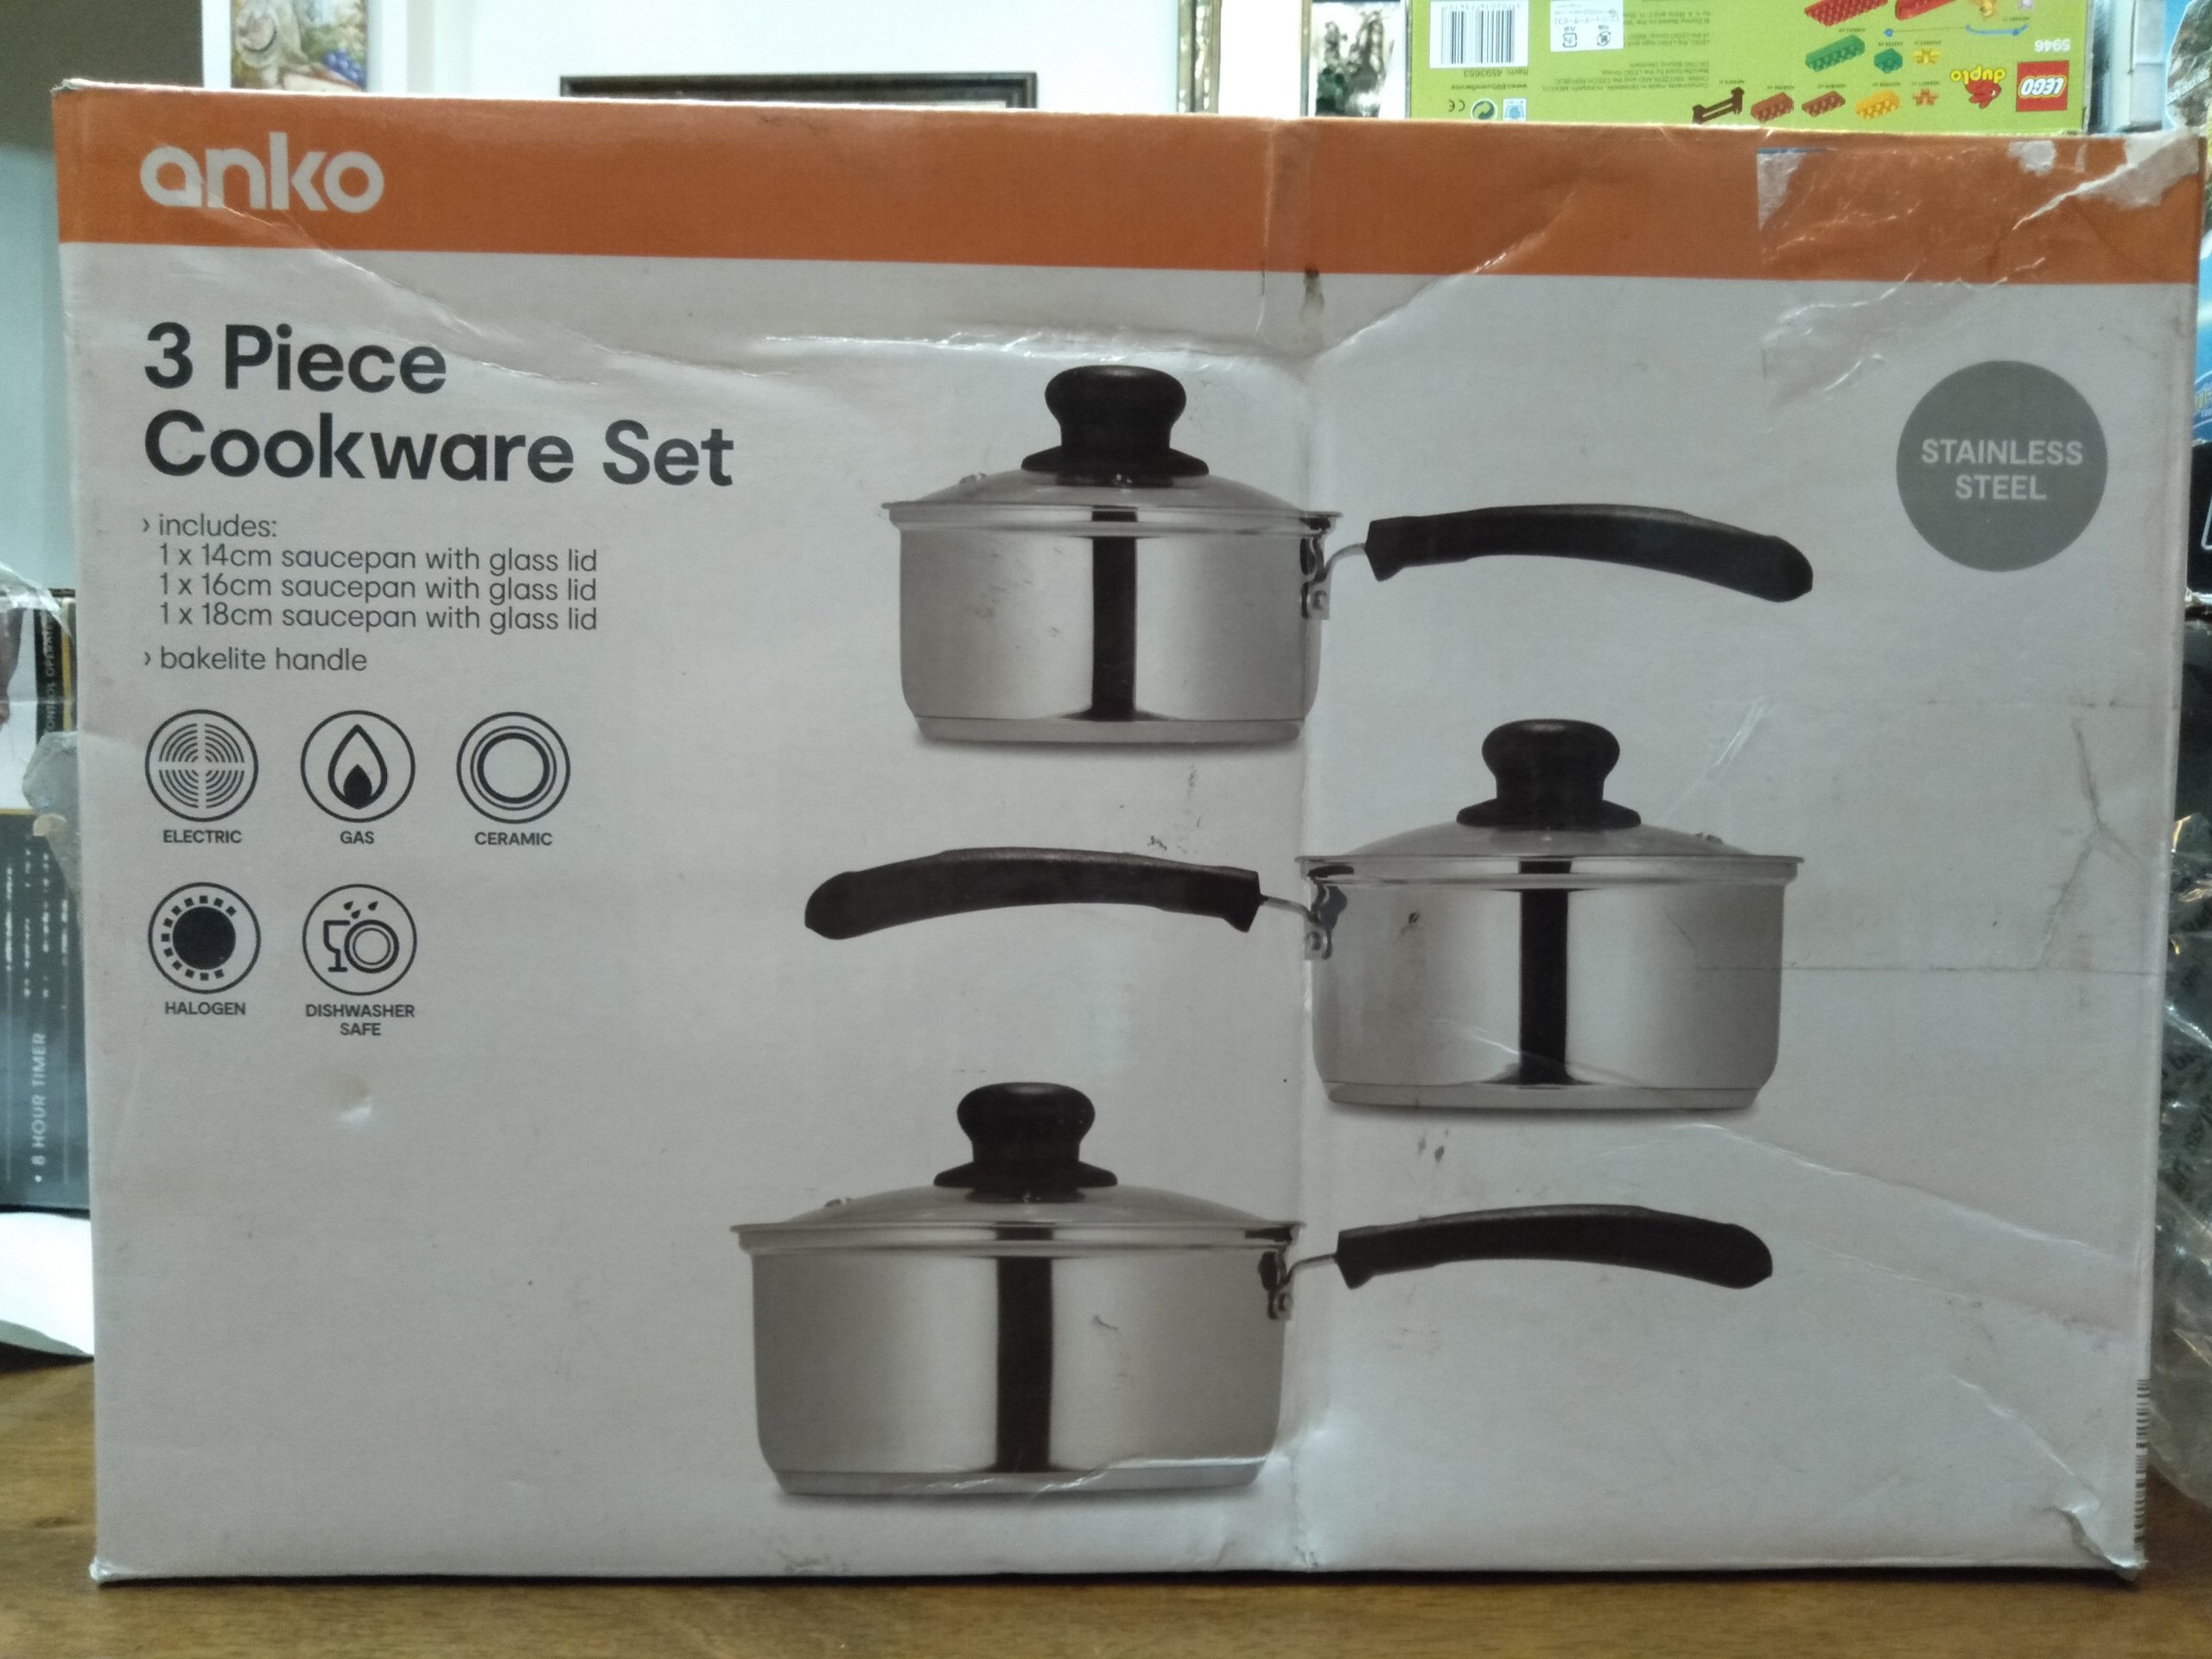 Anko 3 Piece Stainless Steel Cookware Set intended for size 4160 X 3120